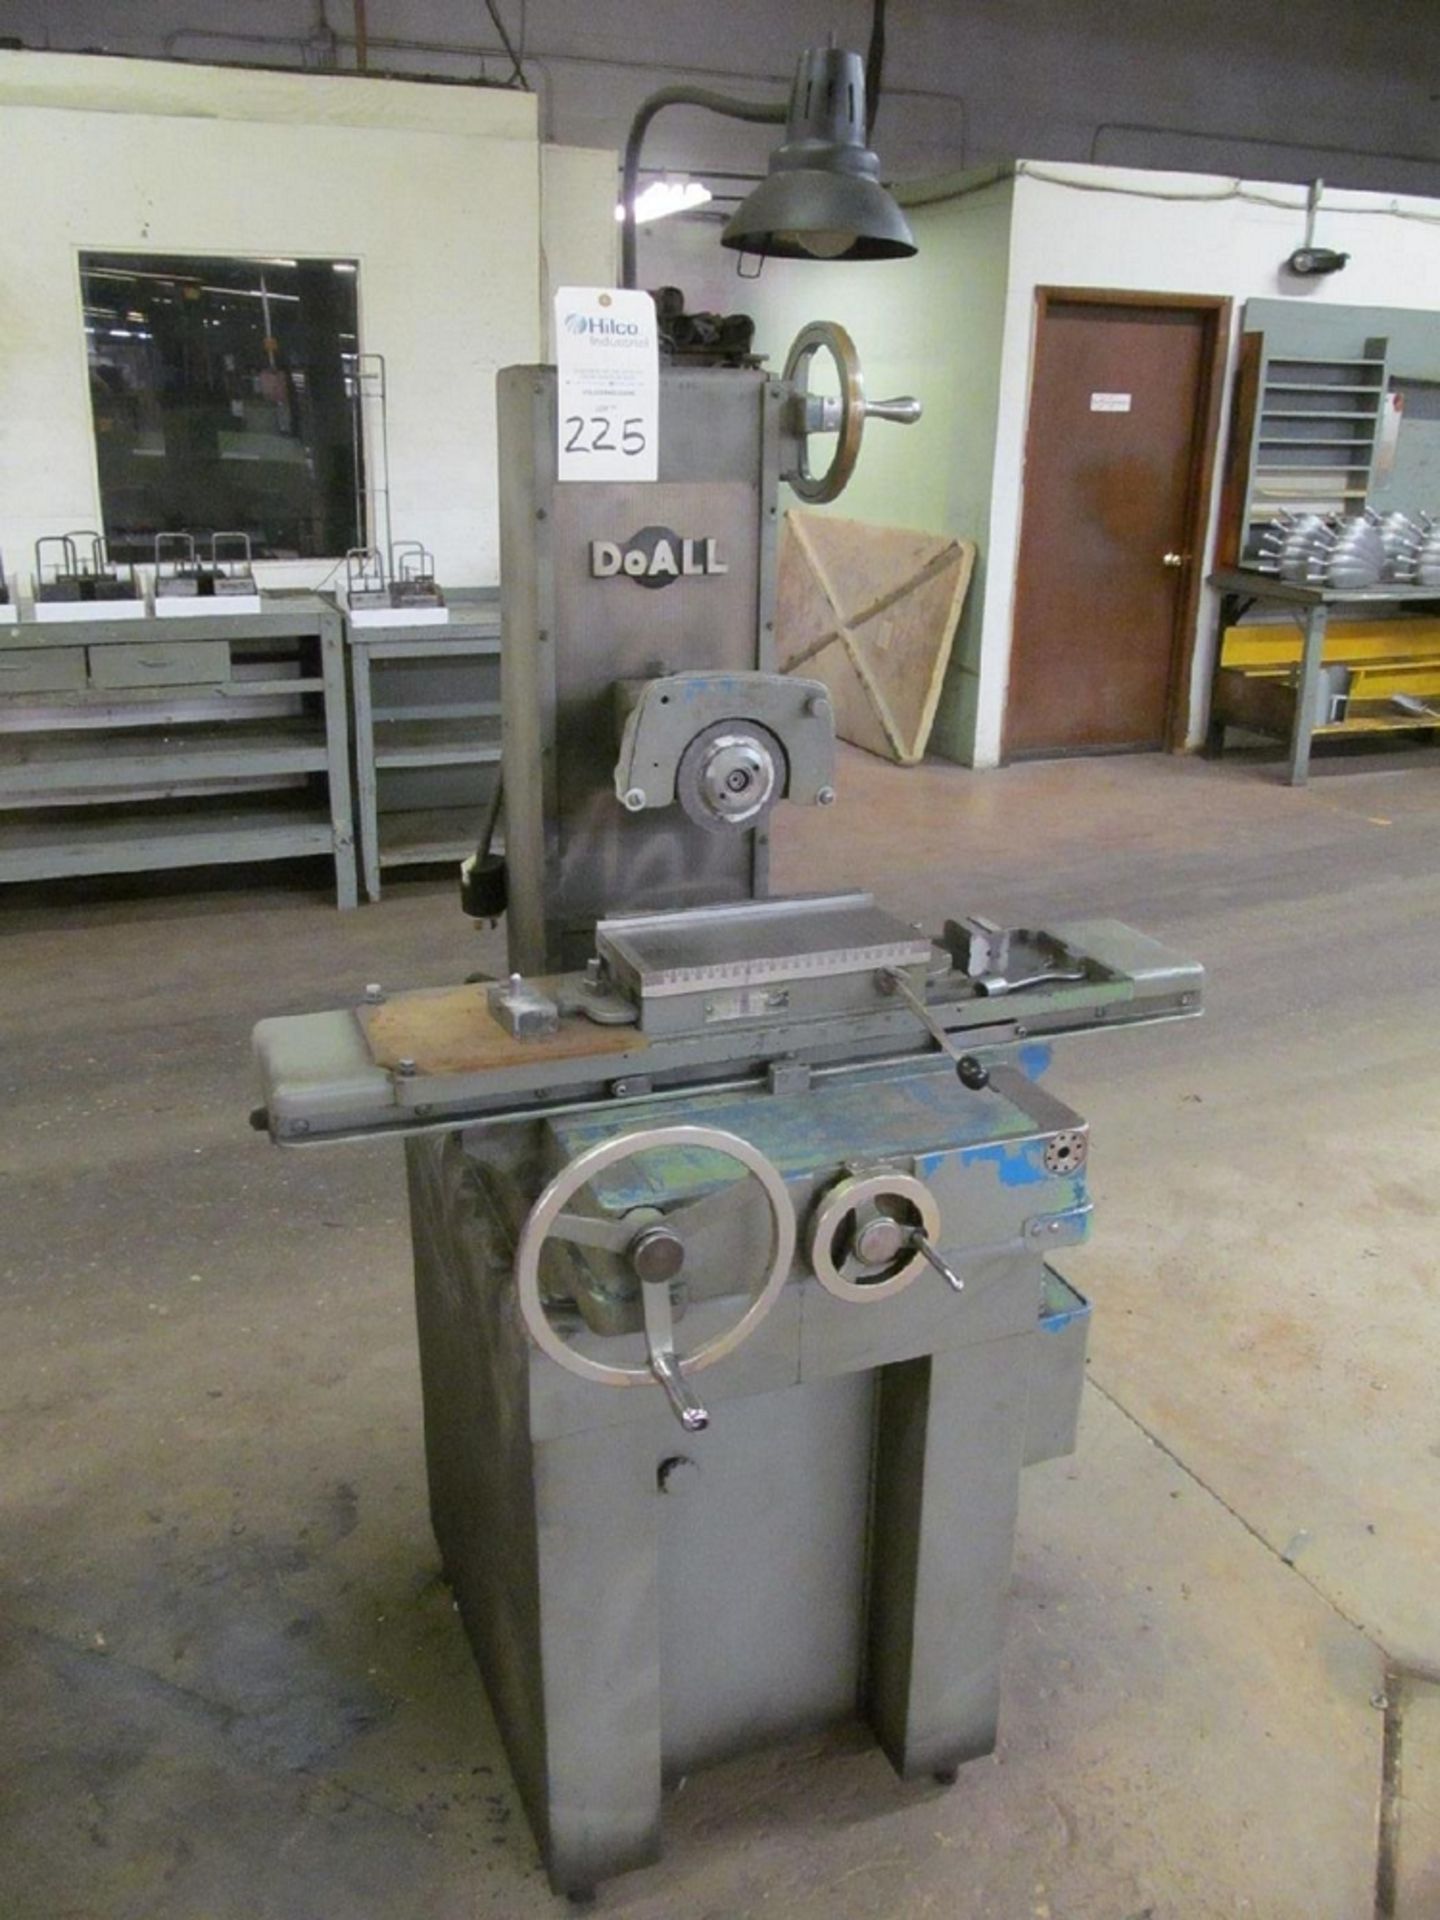 DoAll Model DH-612 6" x 12" Hand Surface Grinder - Image 2 of 3